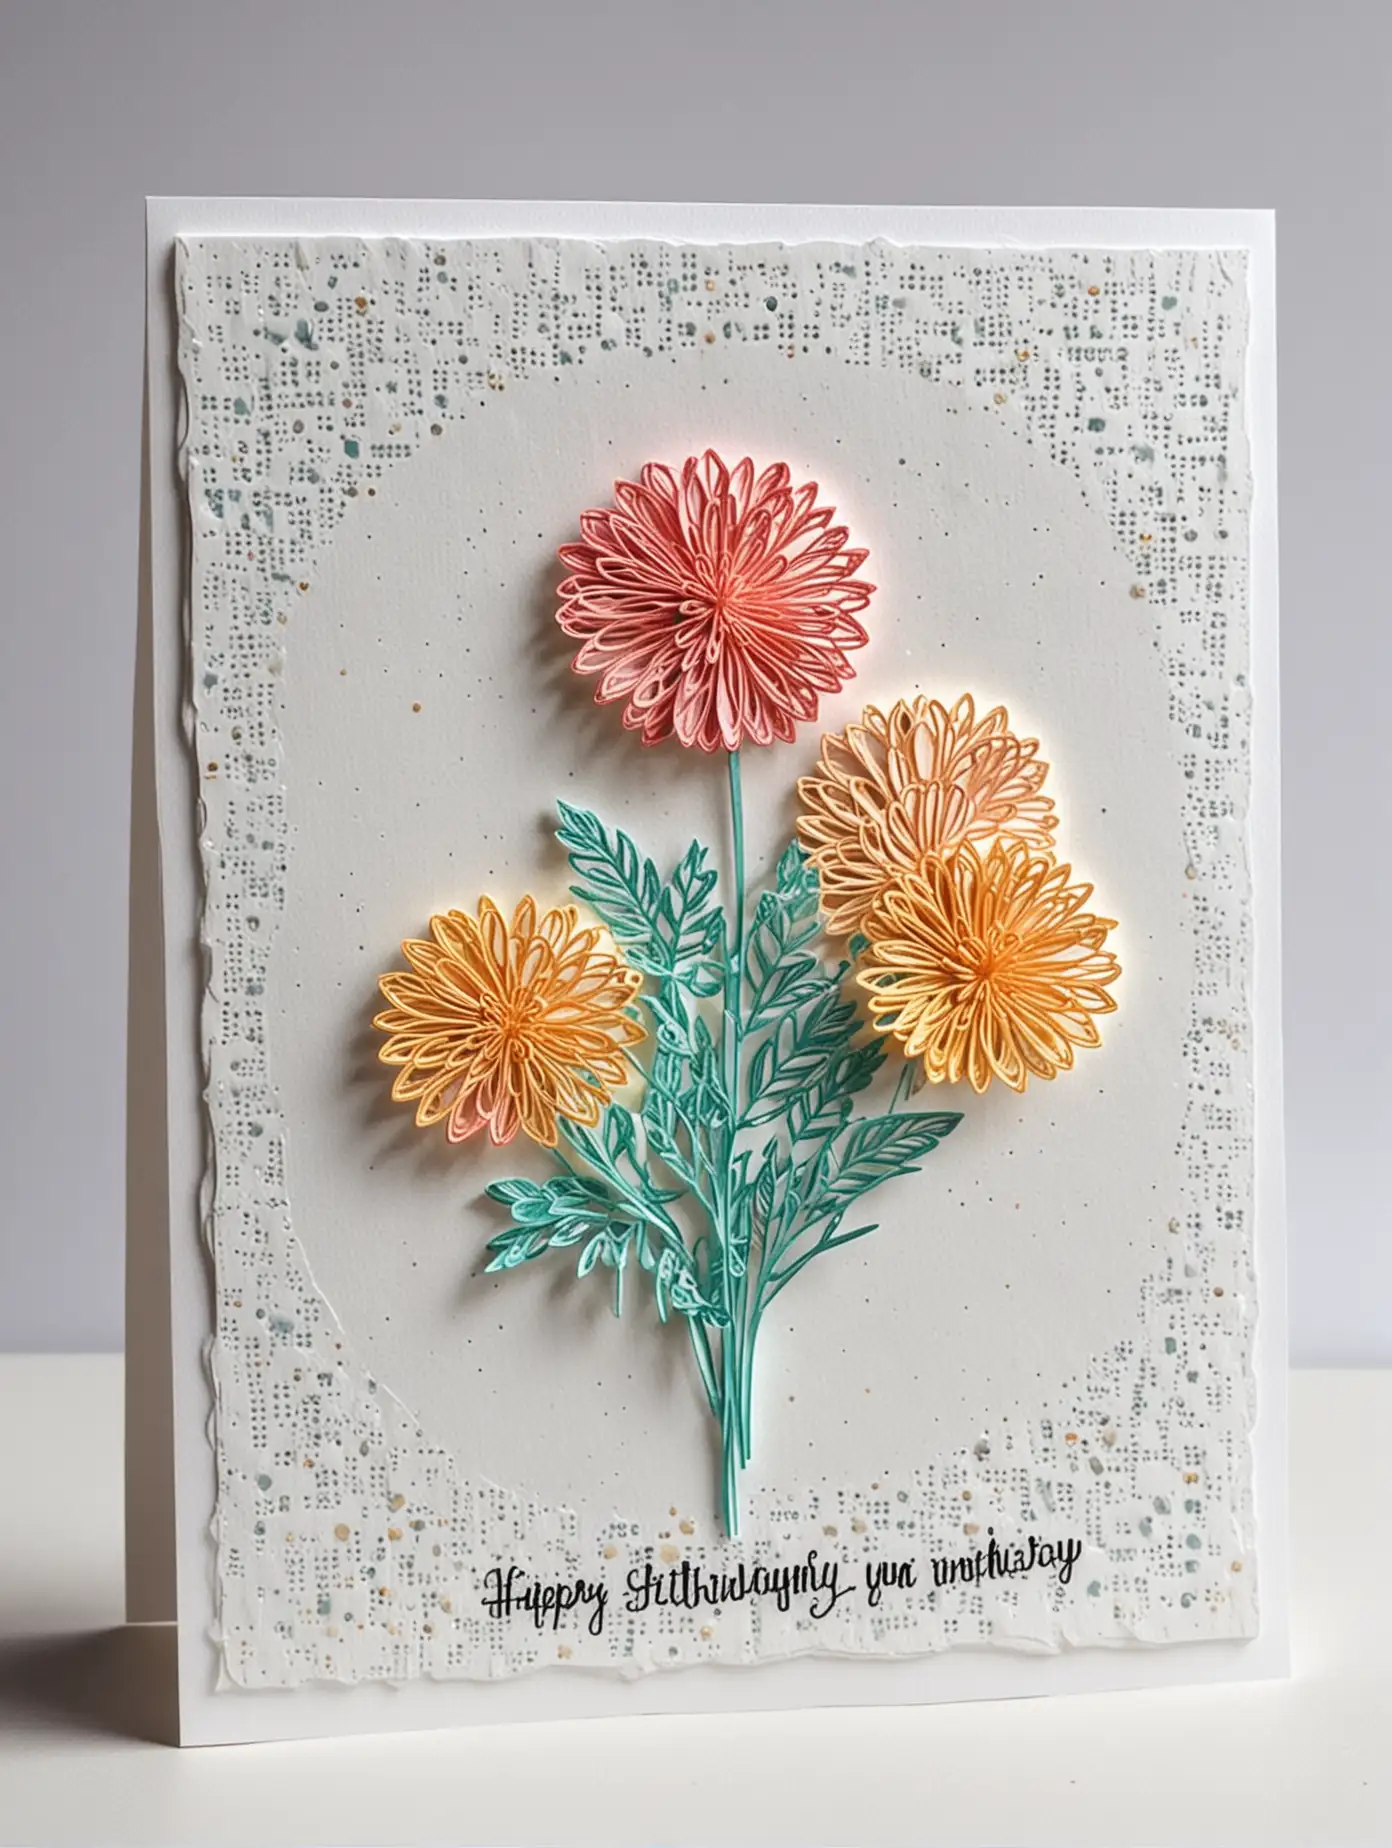 scrapbooking birthday card using the hot embossing technique in a minimalist style